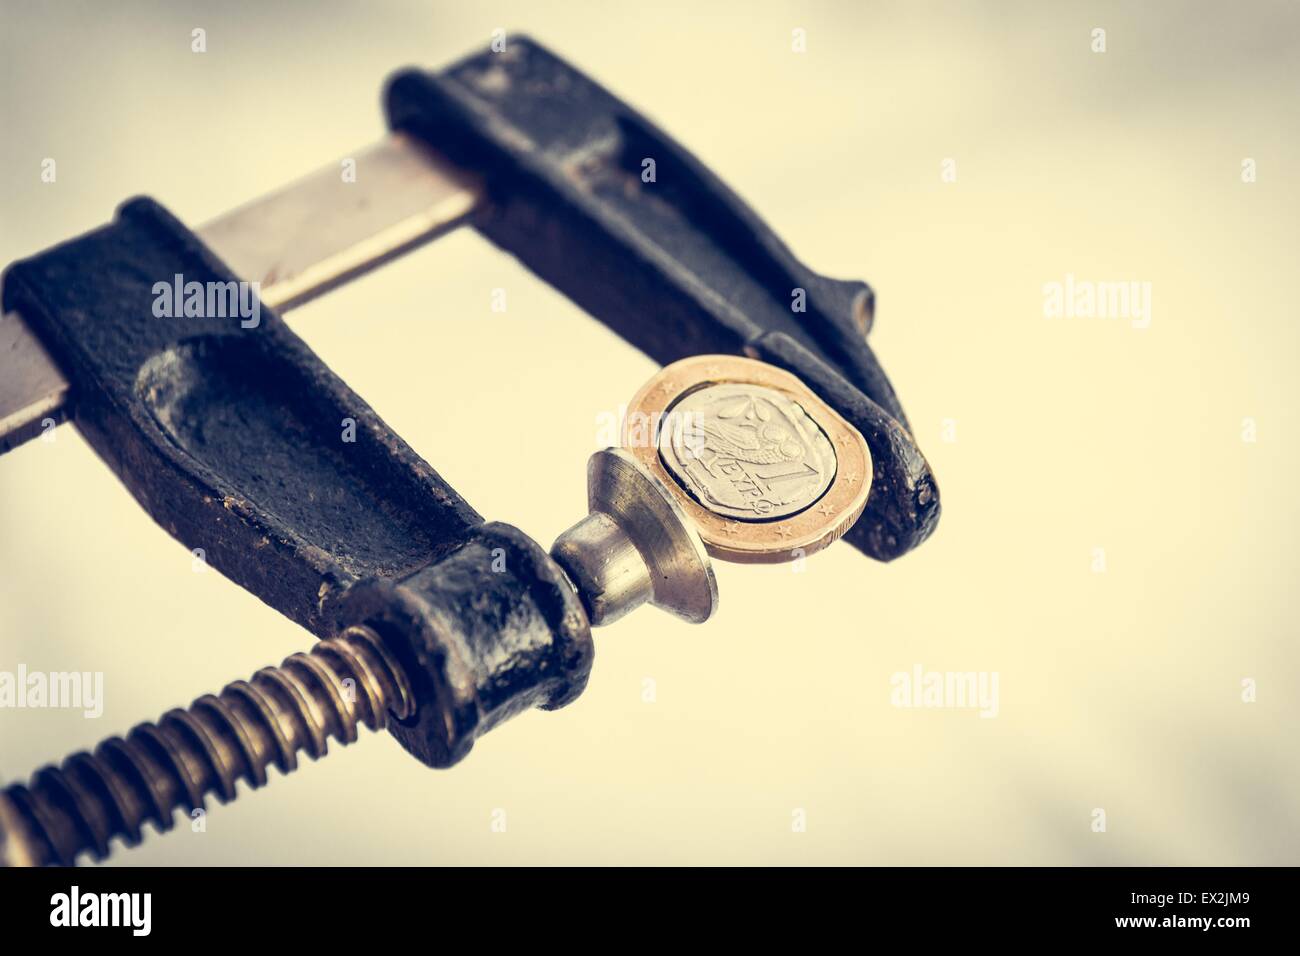 Greek Euro coin squezzed in clamp. Stock Photo